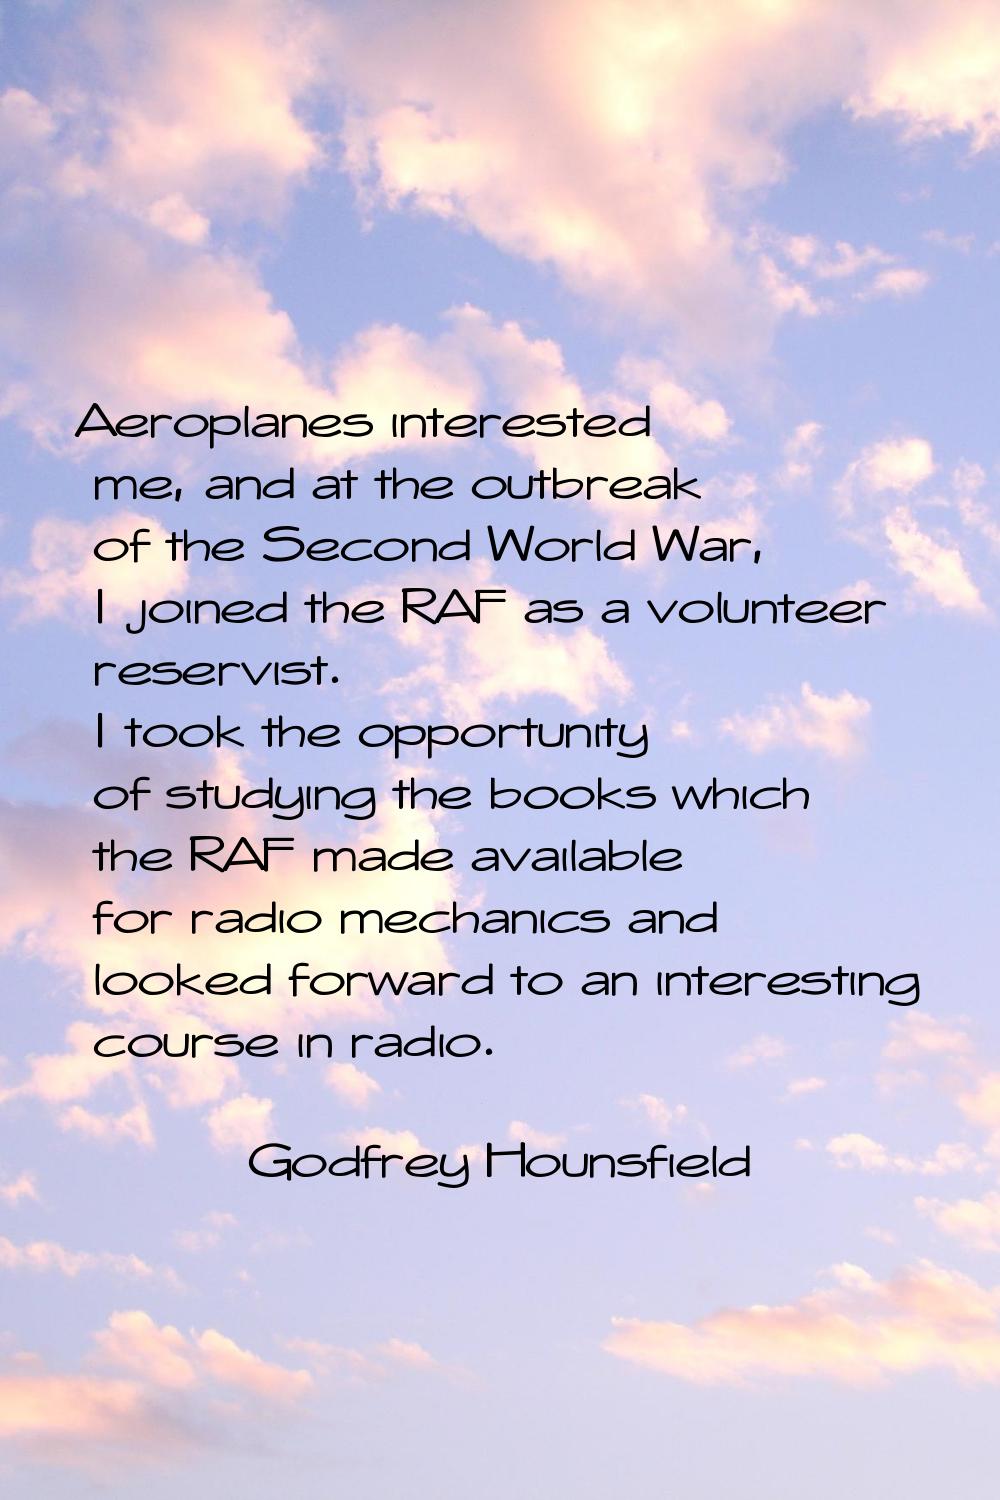 Aeroplanes interested me, and at the outbreak of the Second World War, I joined the RAF as a volunt